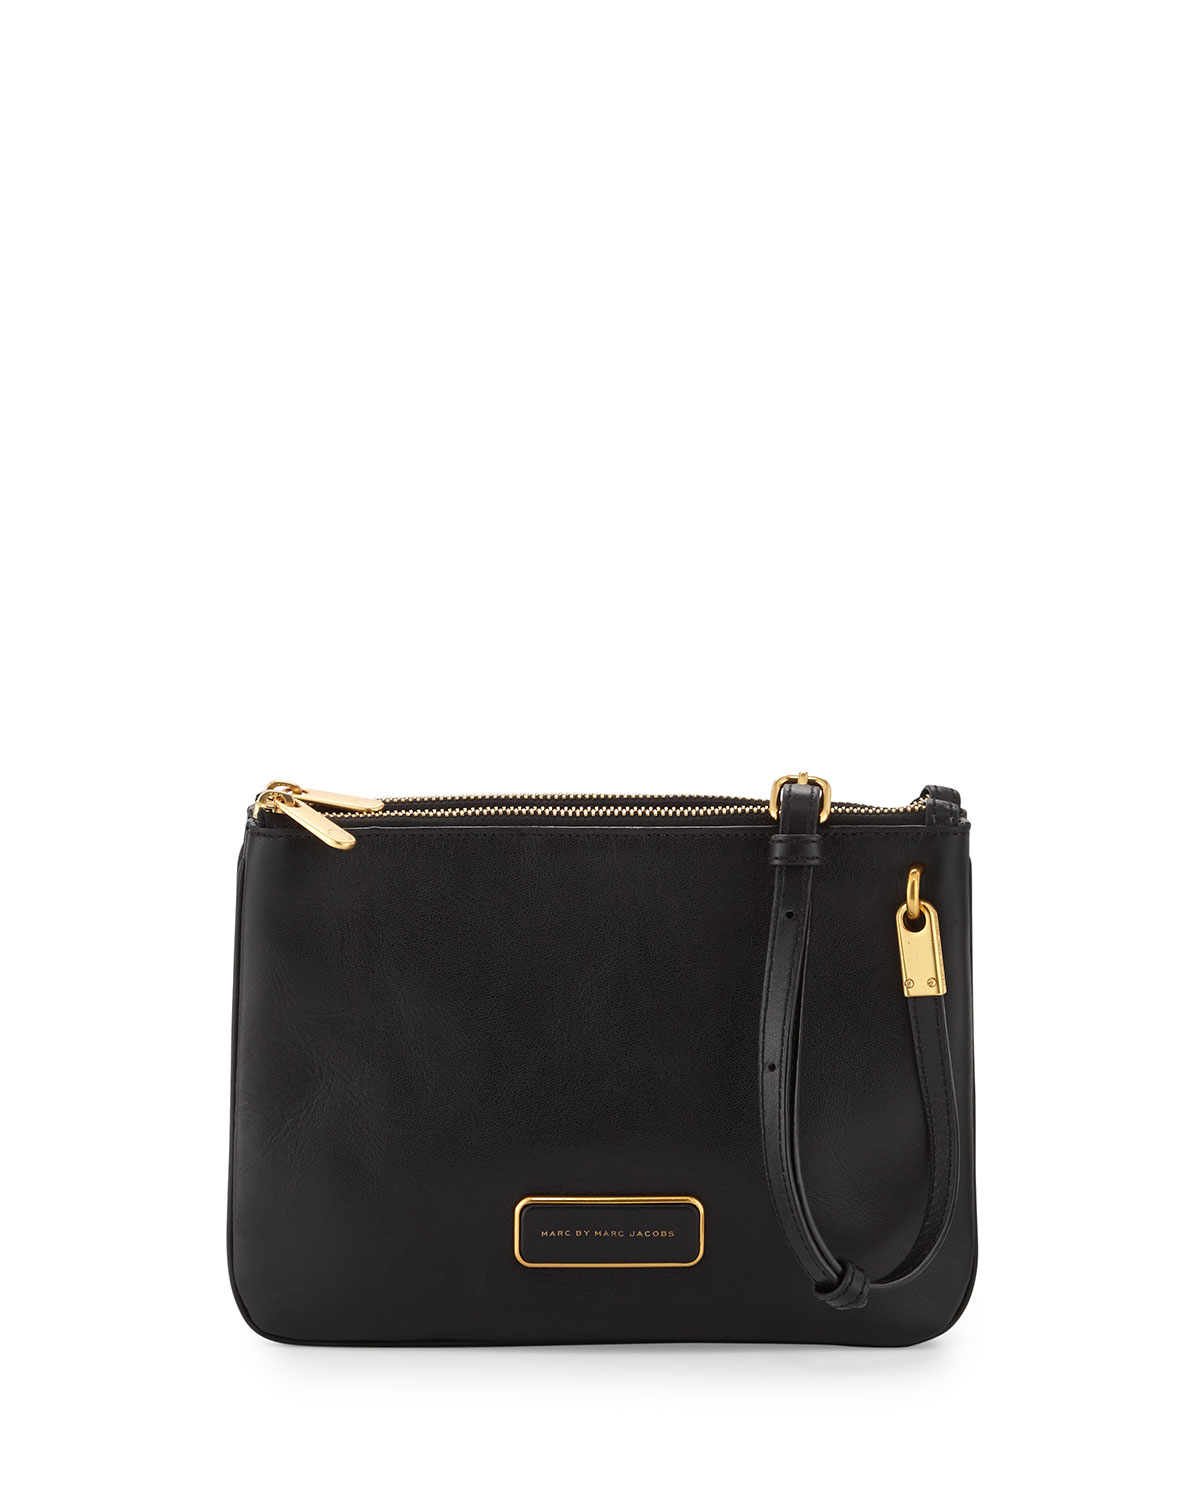 Lyst - Marc By Marc Jacobs Ligero Double Percy Crossbody Bag in Black